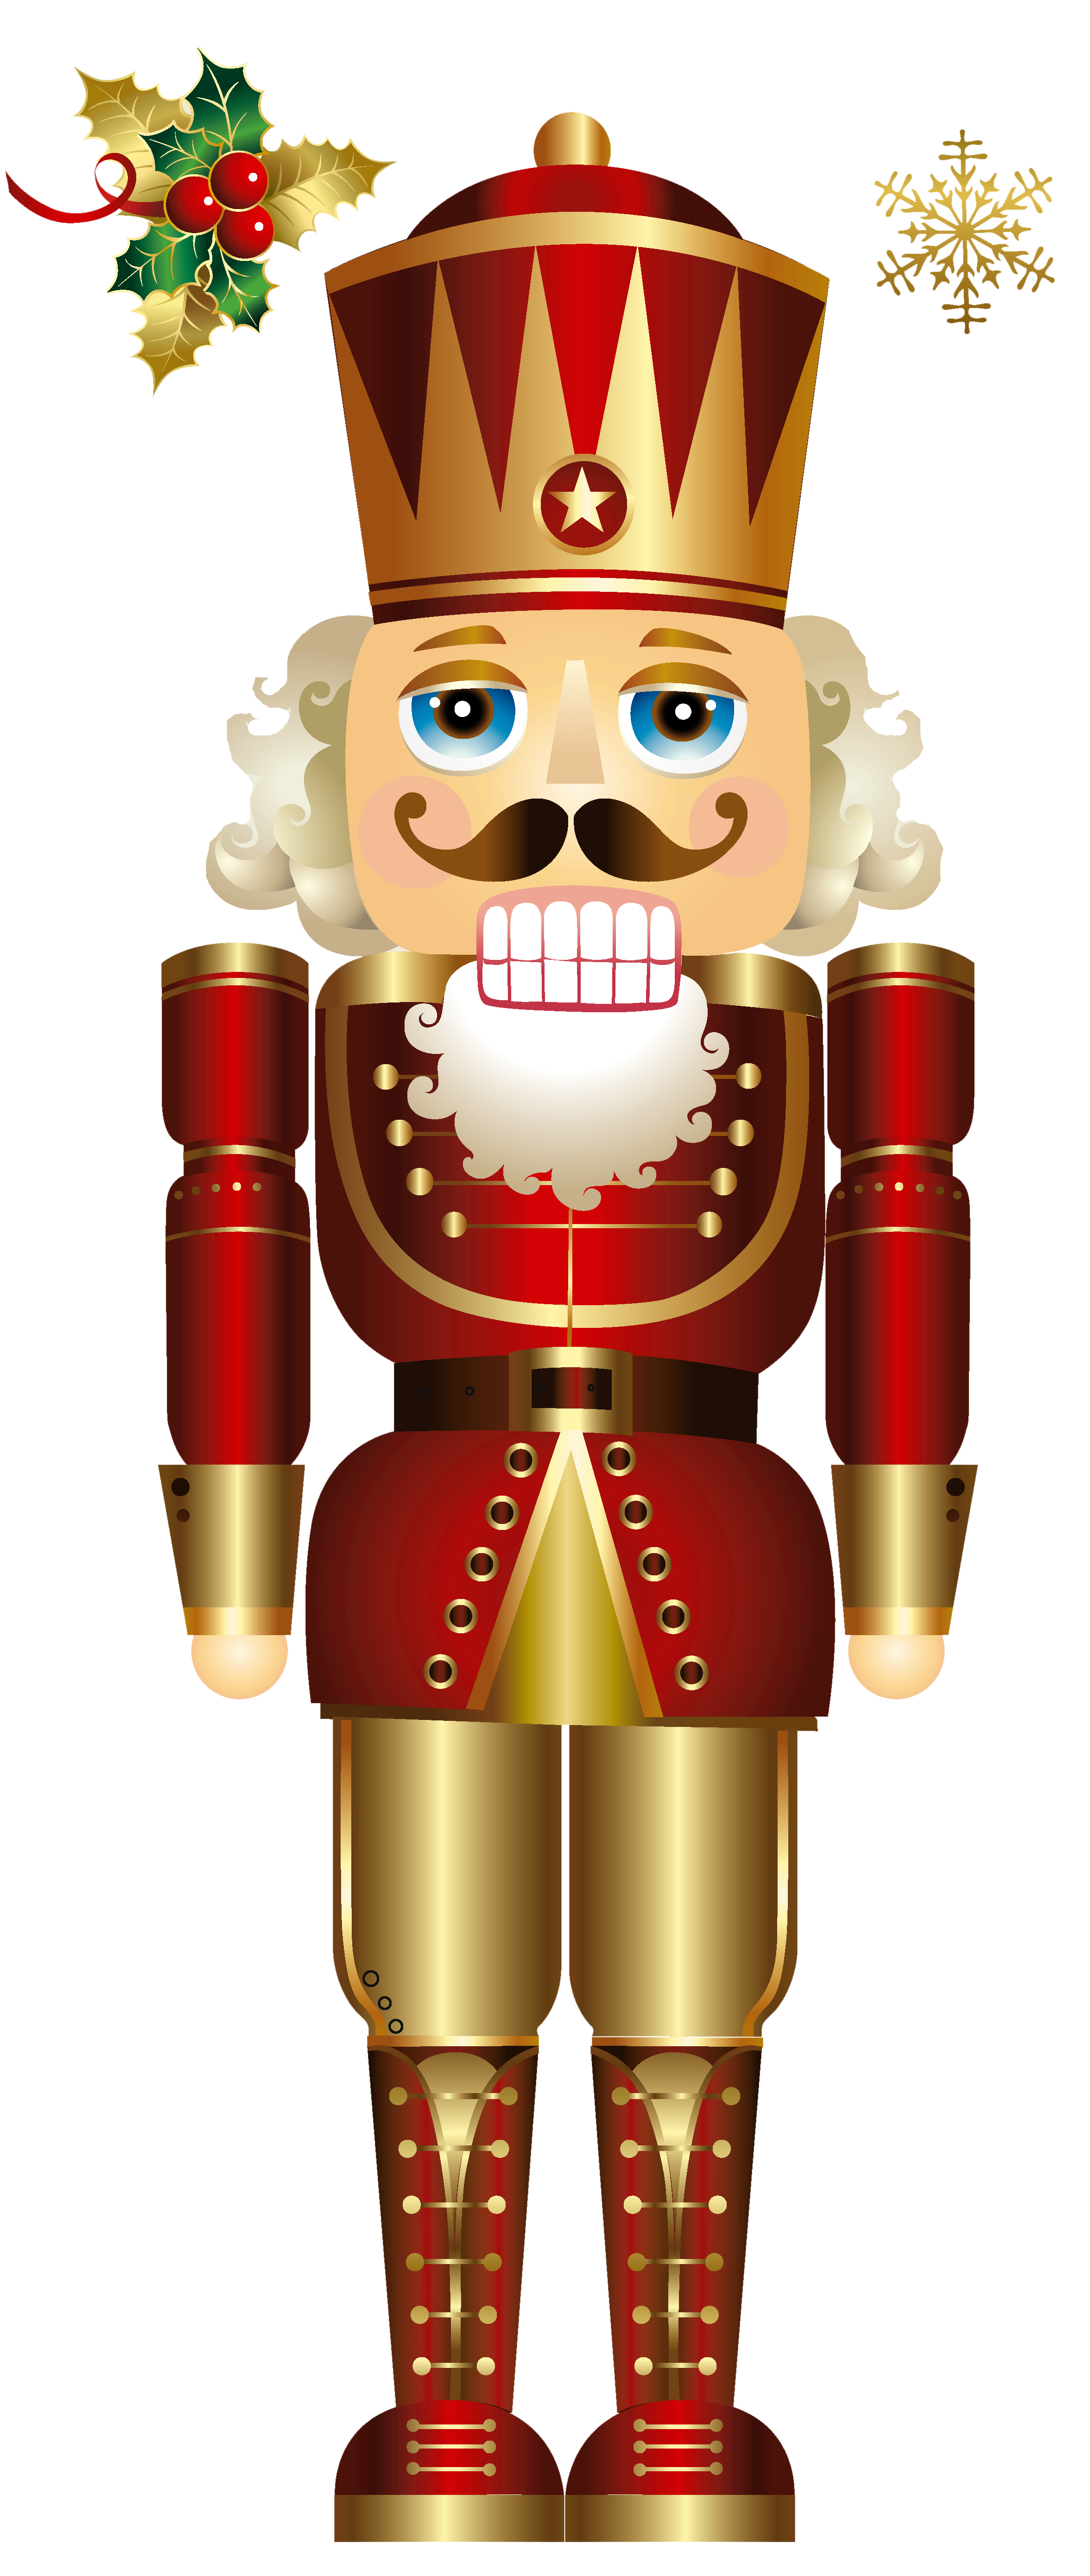 Free christmas nutcracker adult. Dictionary clipart reference